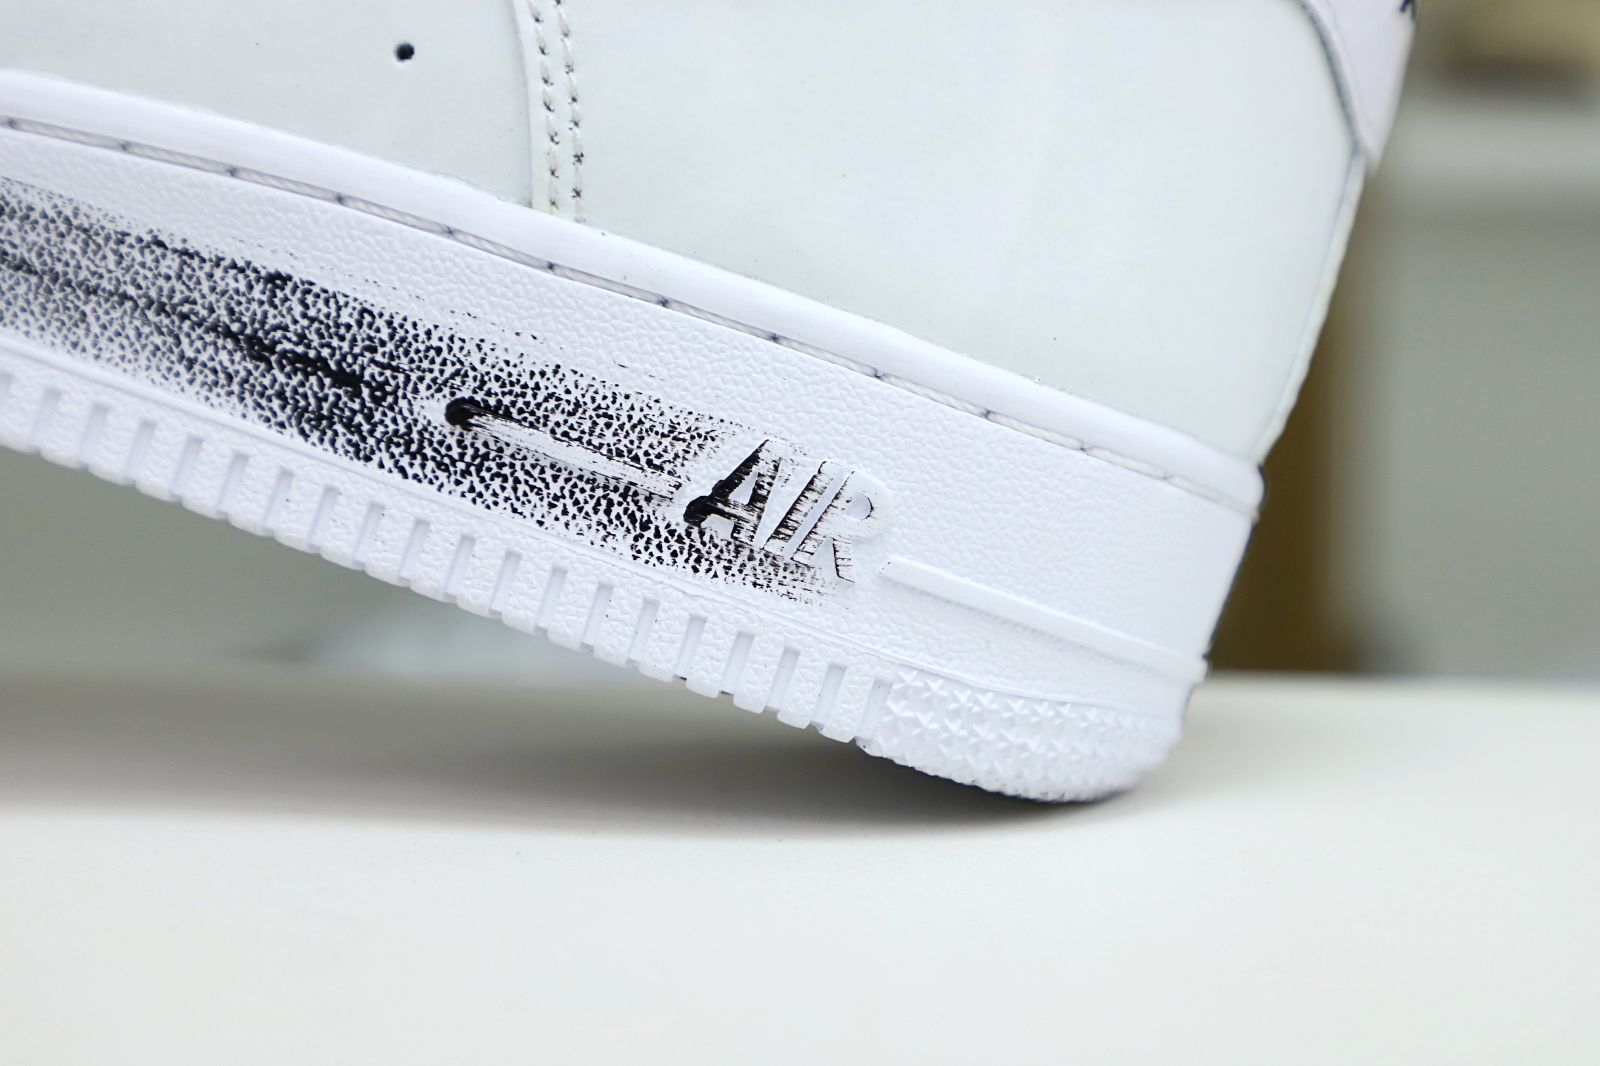 Nike Air Force 1 Low para- noise 2.0